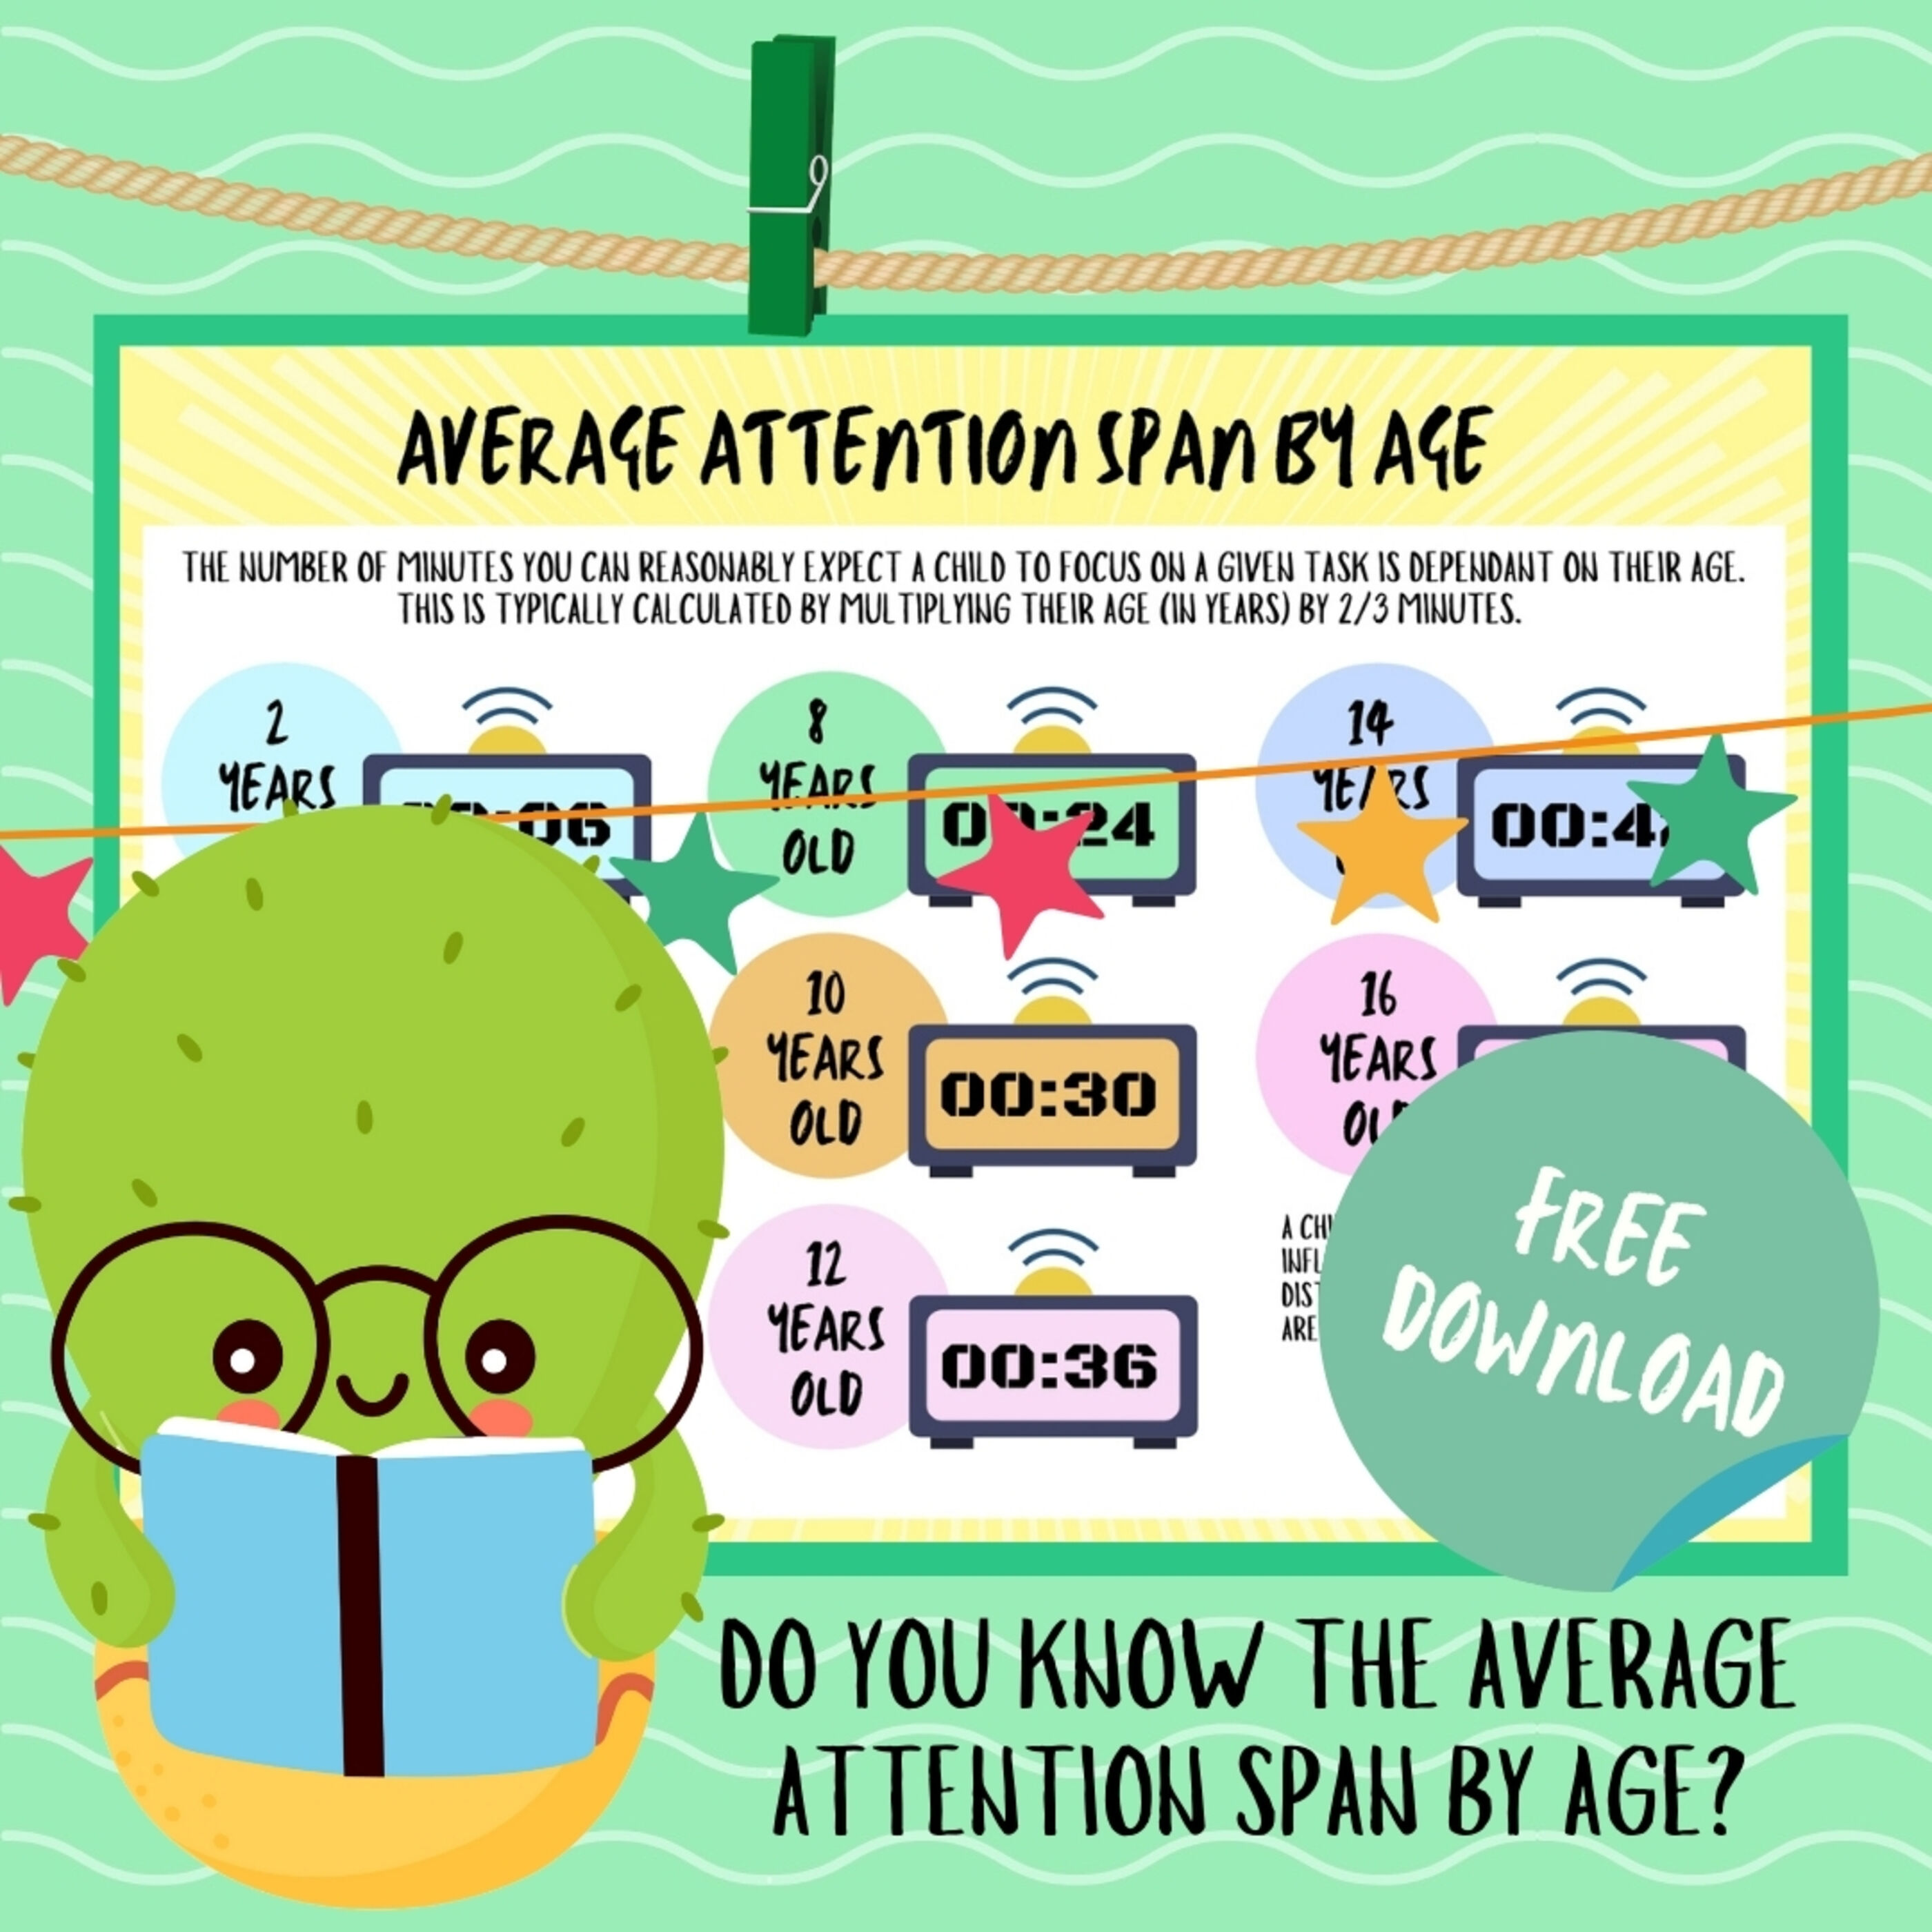 Average Attention Span By Age